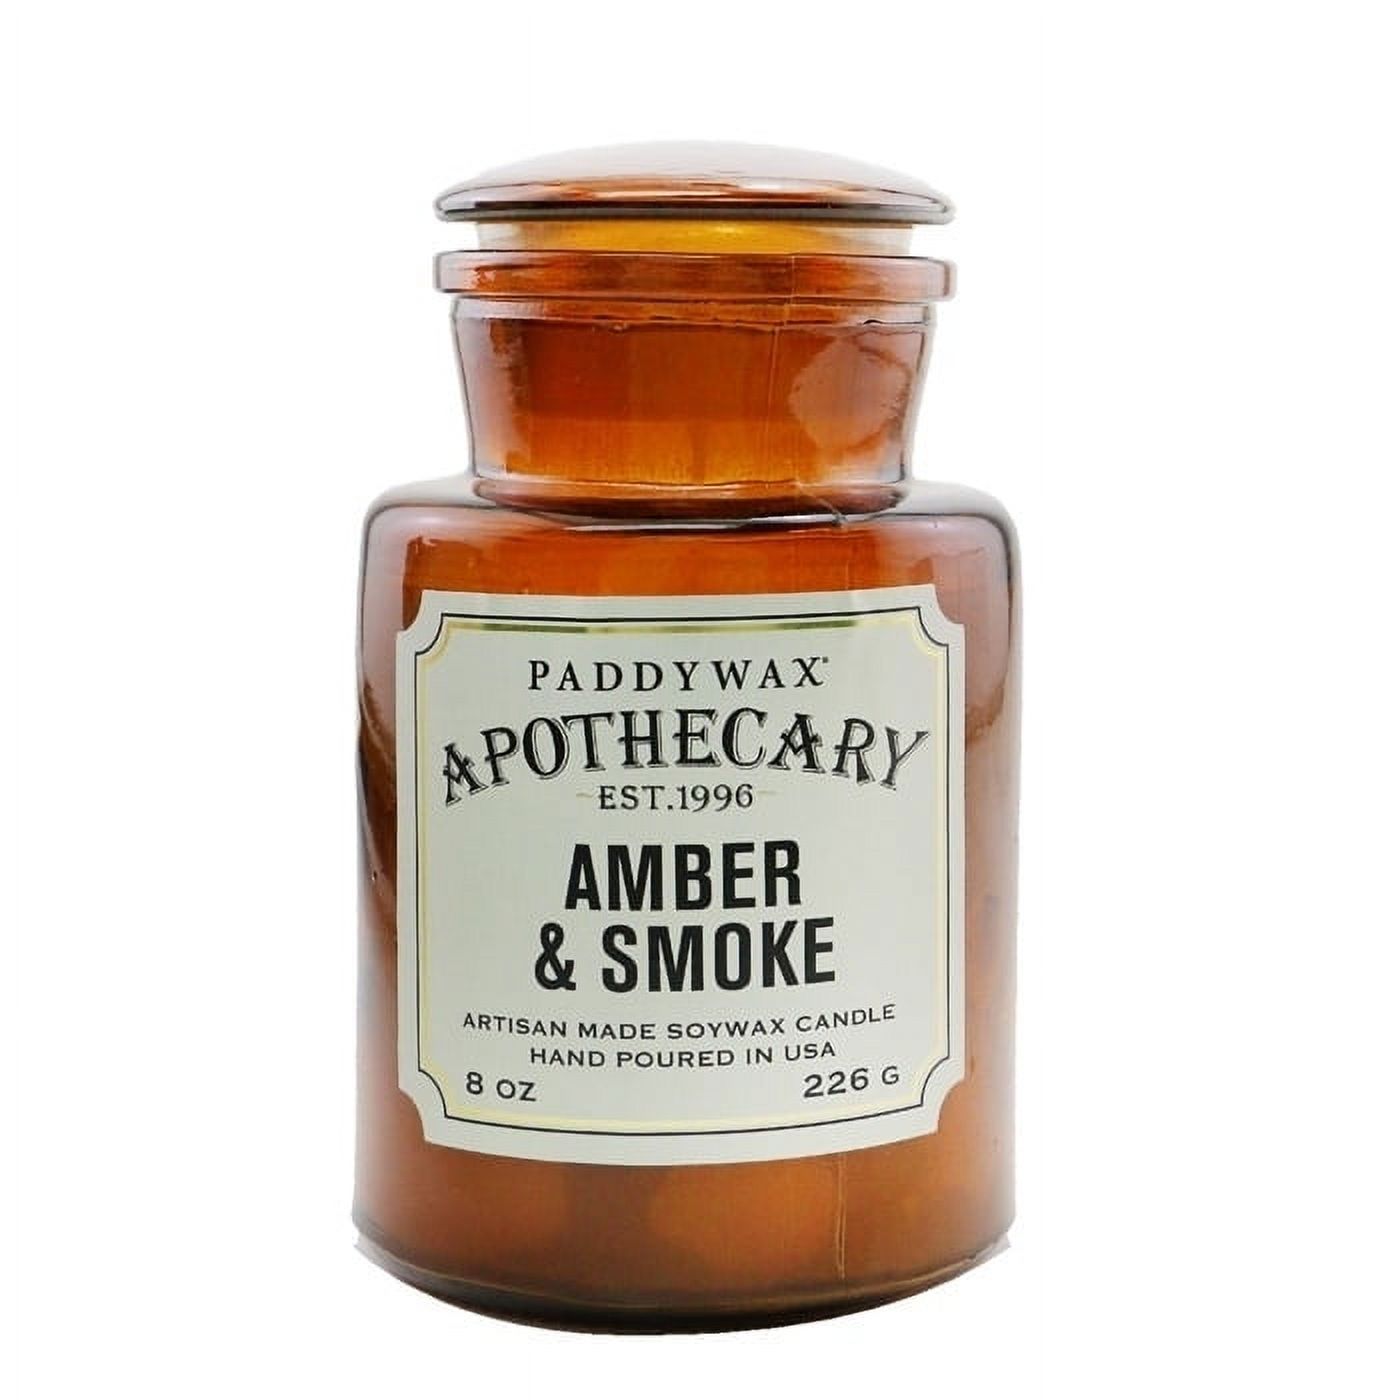 Paddywax Apothecary Candle - Amber & Smoke 226g/8oz - image 1 of 3